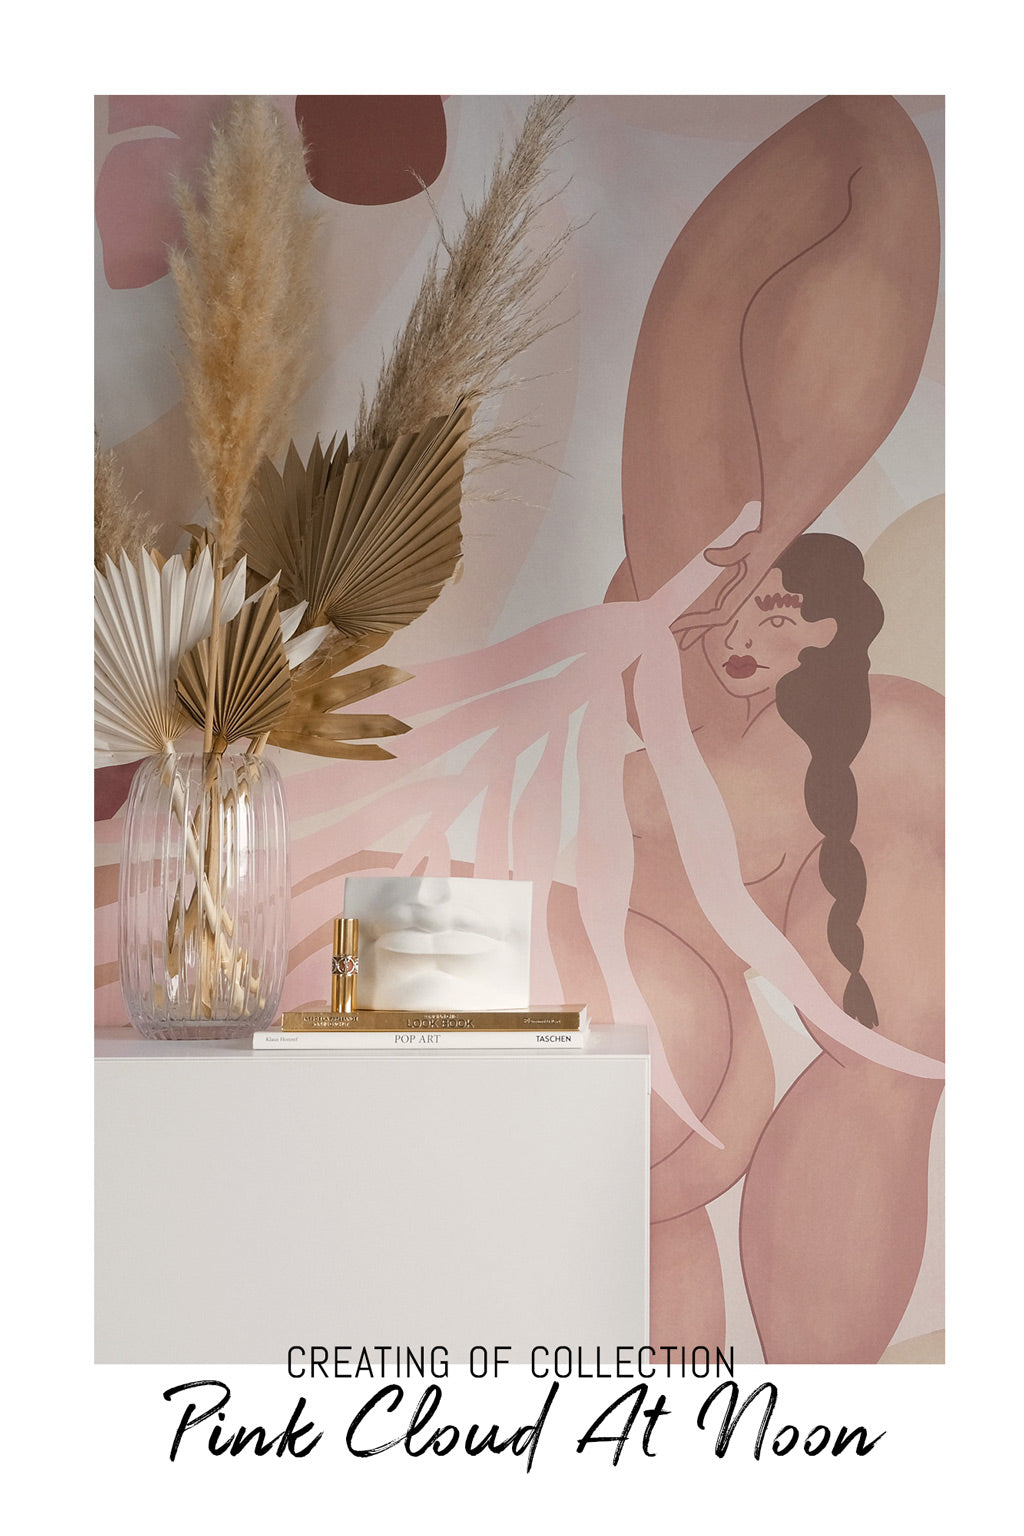 Modern bohemian style wall art collection emphasising powerful female figure